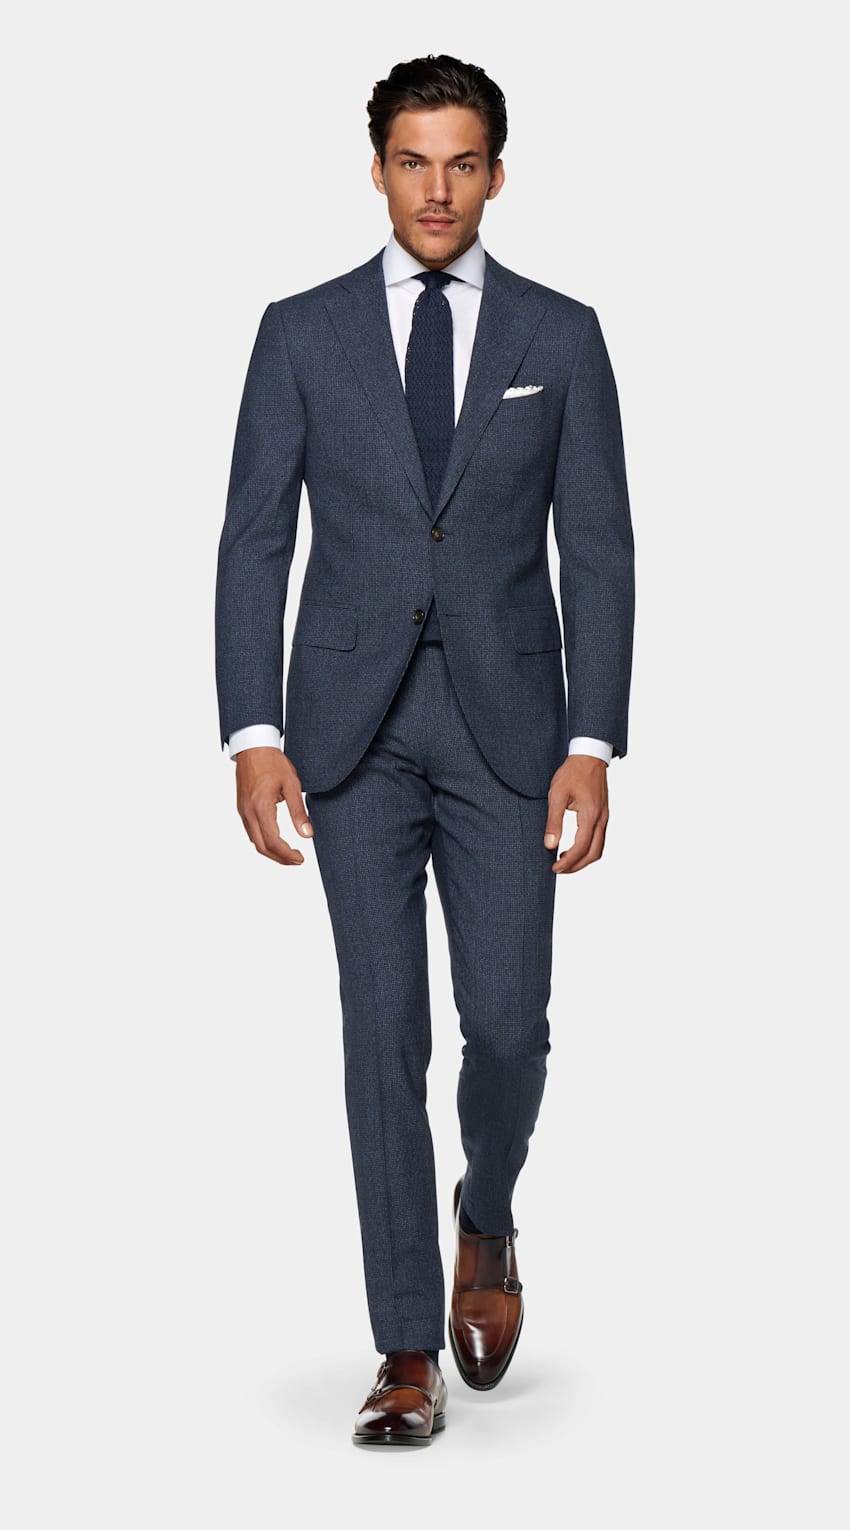 Mid Blue Houndstooth Lazio Suit | Pure Wool S110's Single Breasted ...